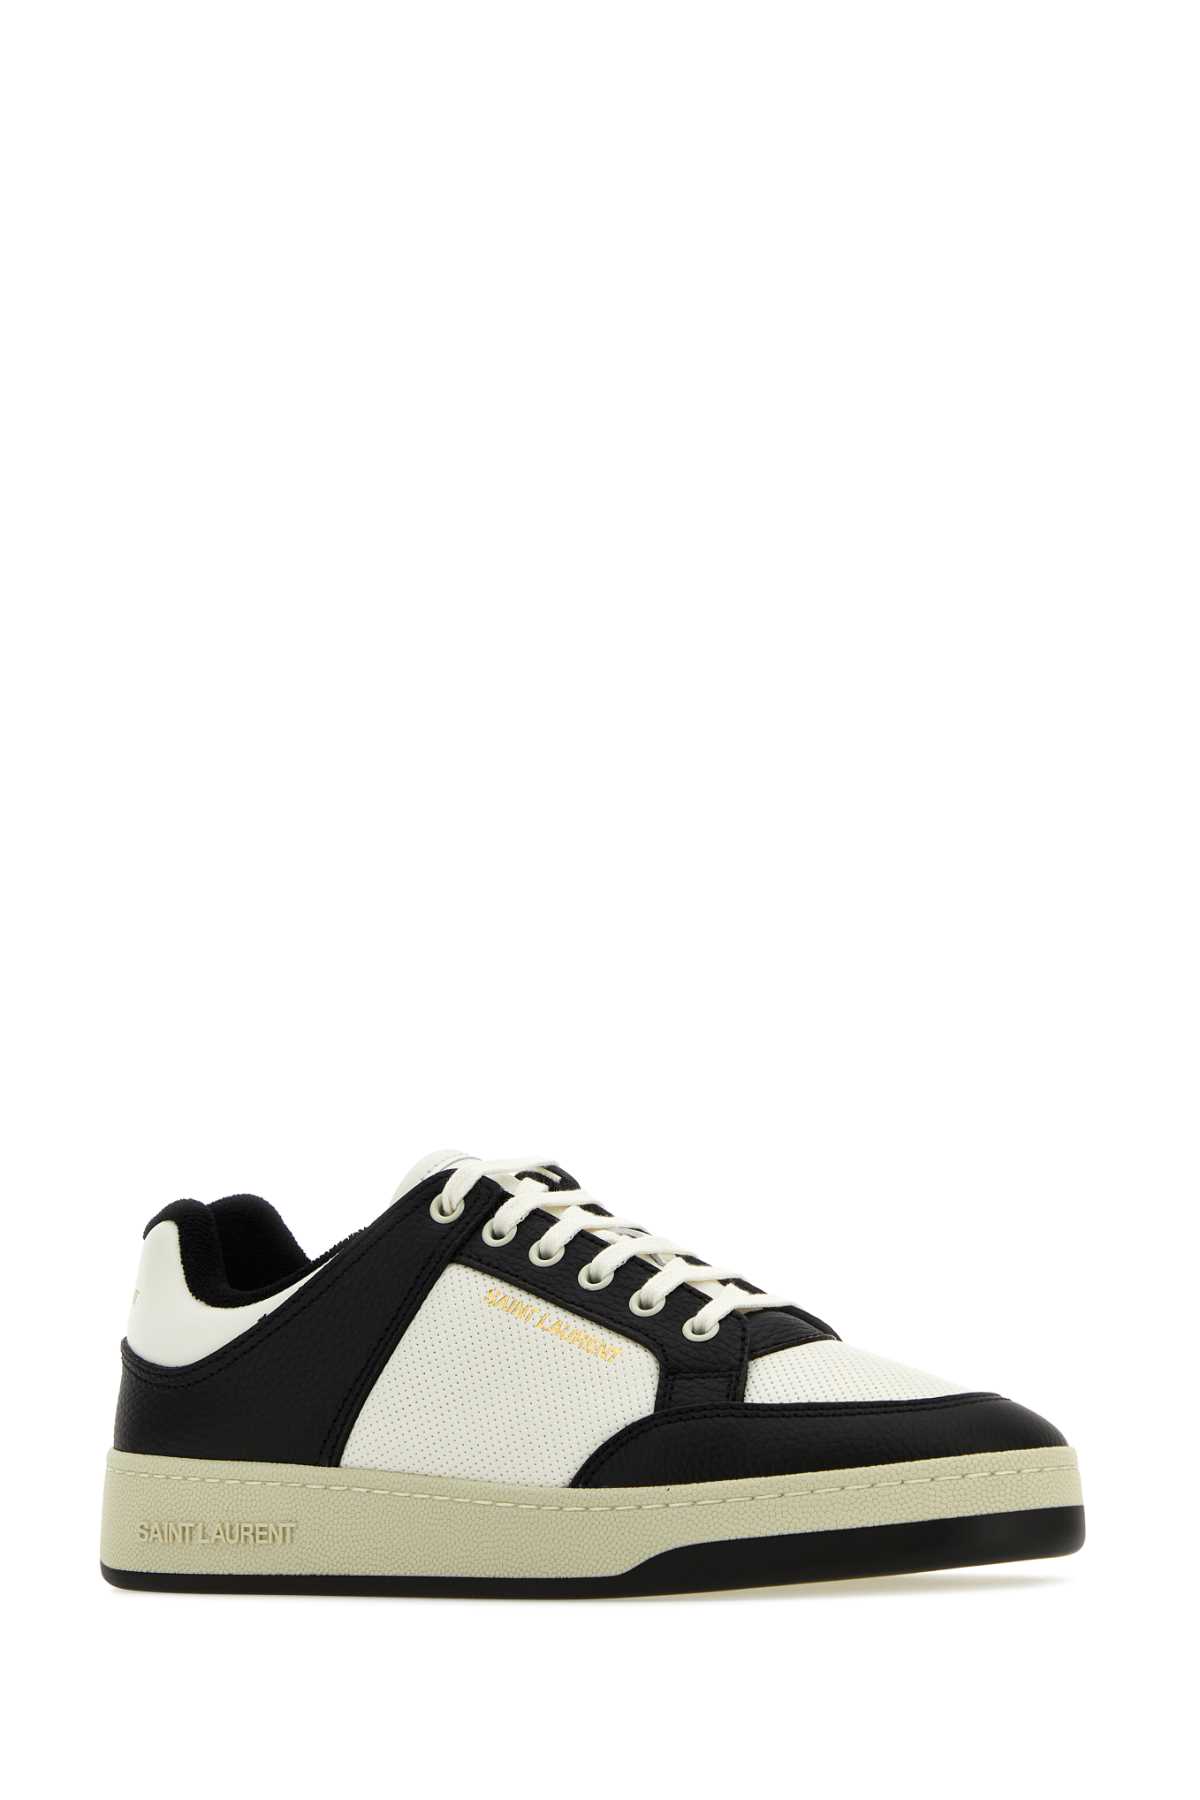 Saint Laurent Two-tone Leather Sl/61 Sneakers In Multicolor